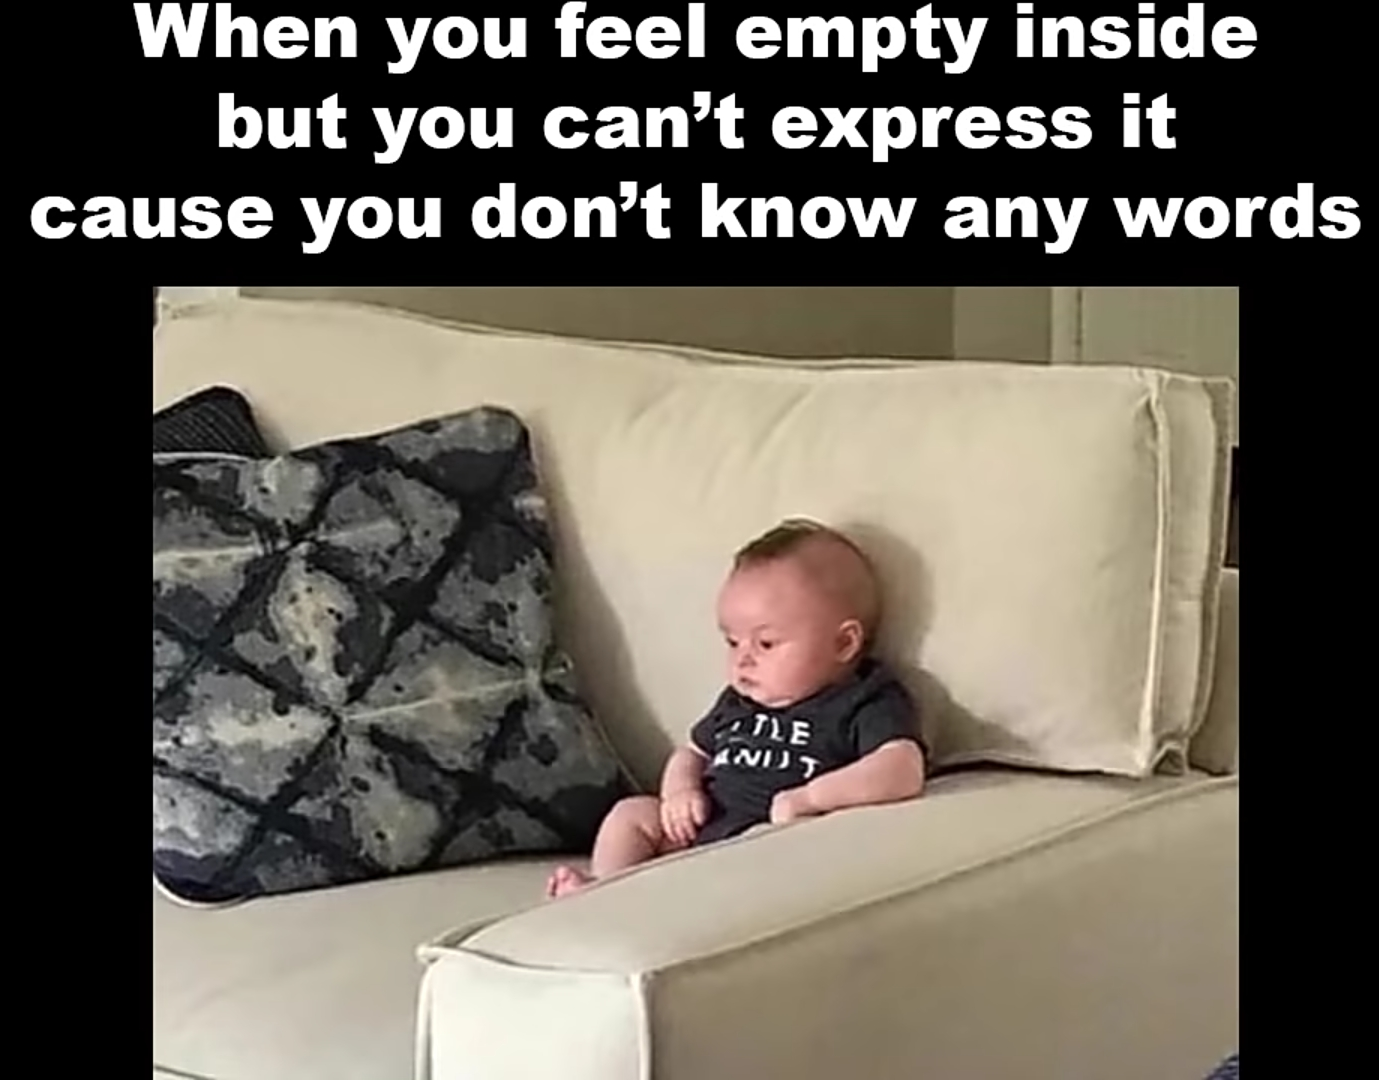 When you feel empty inside... - Existential crisis, Children, Sofa, Picture with text